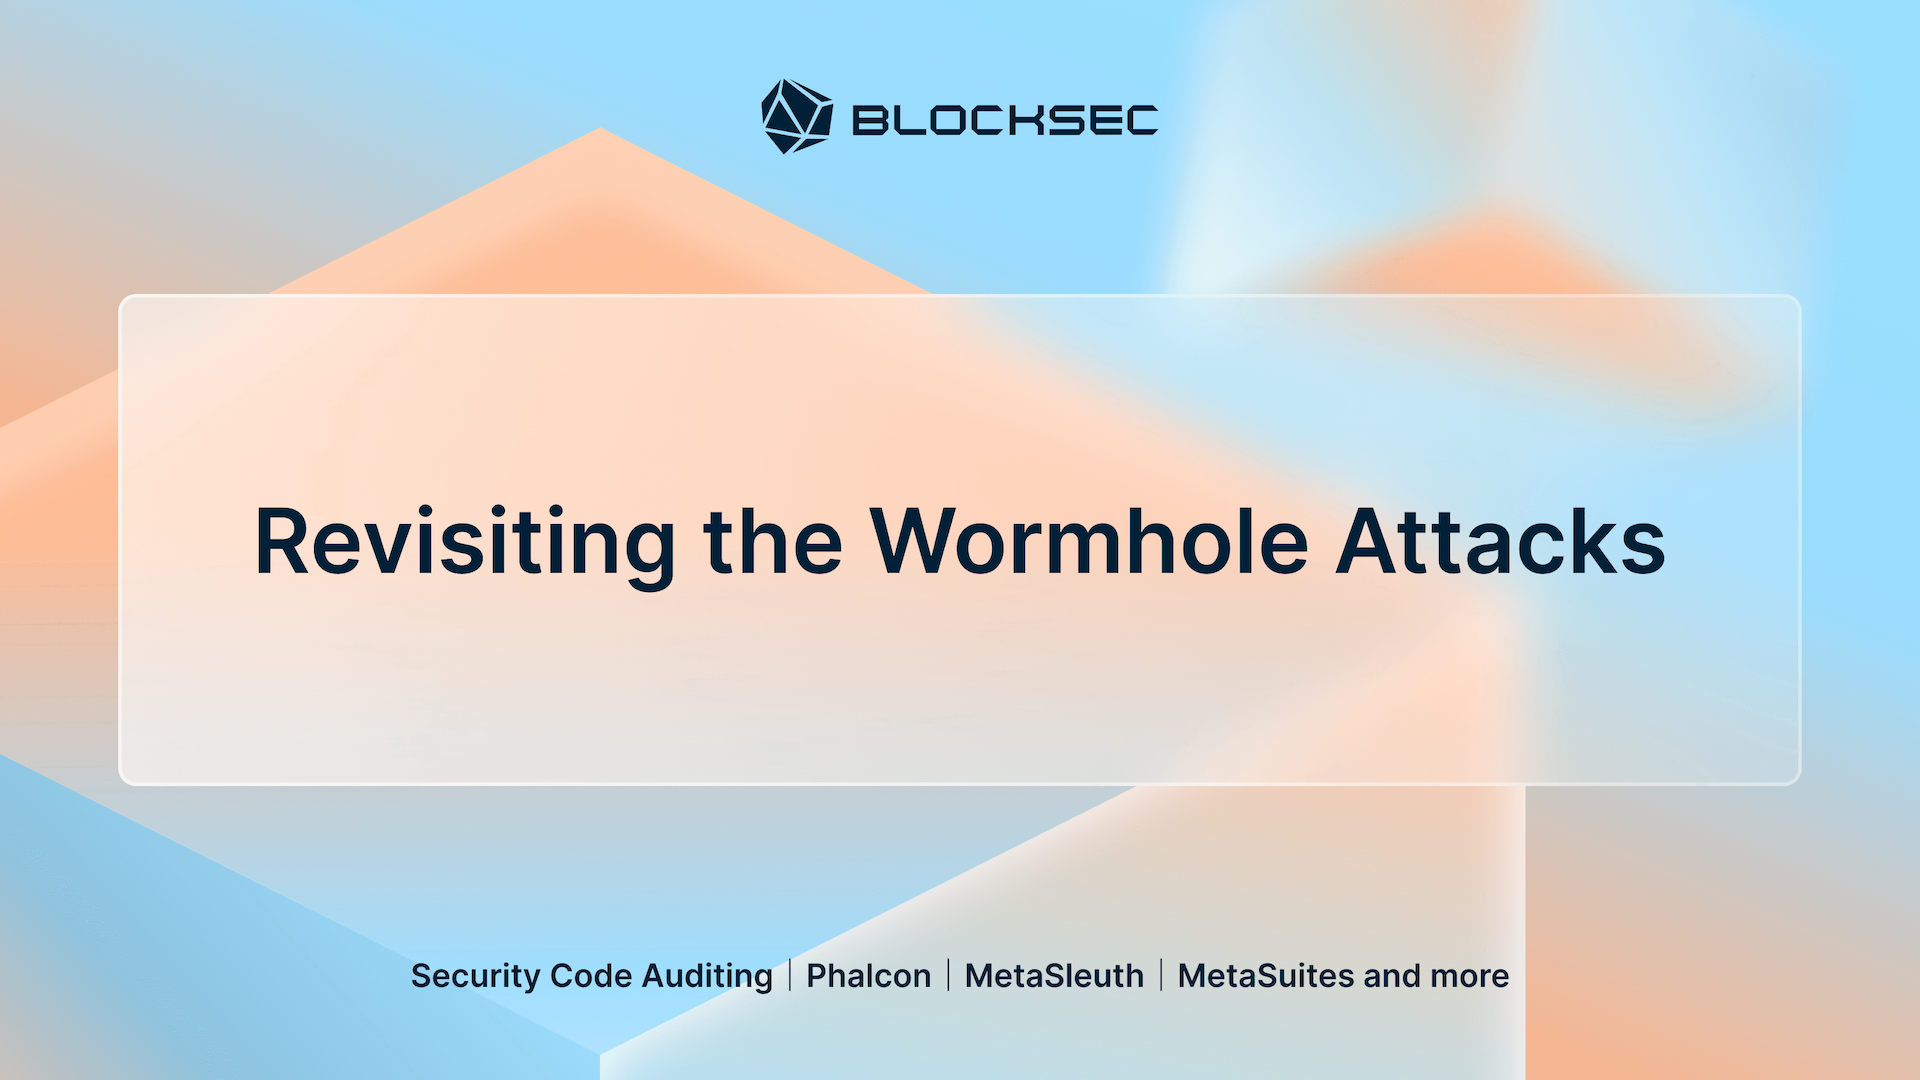 Revisiting the Wormhole Attacks